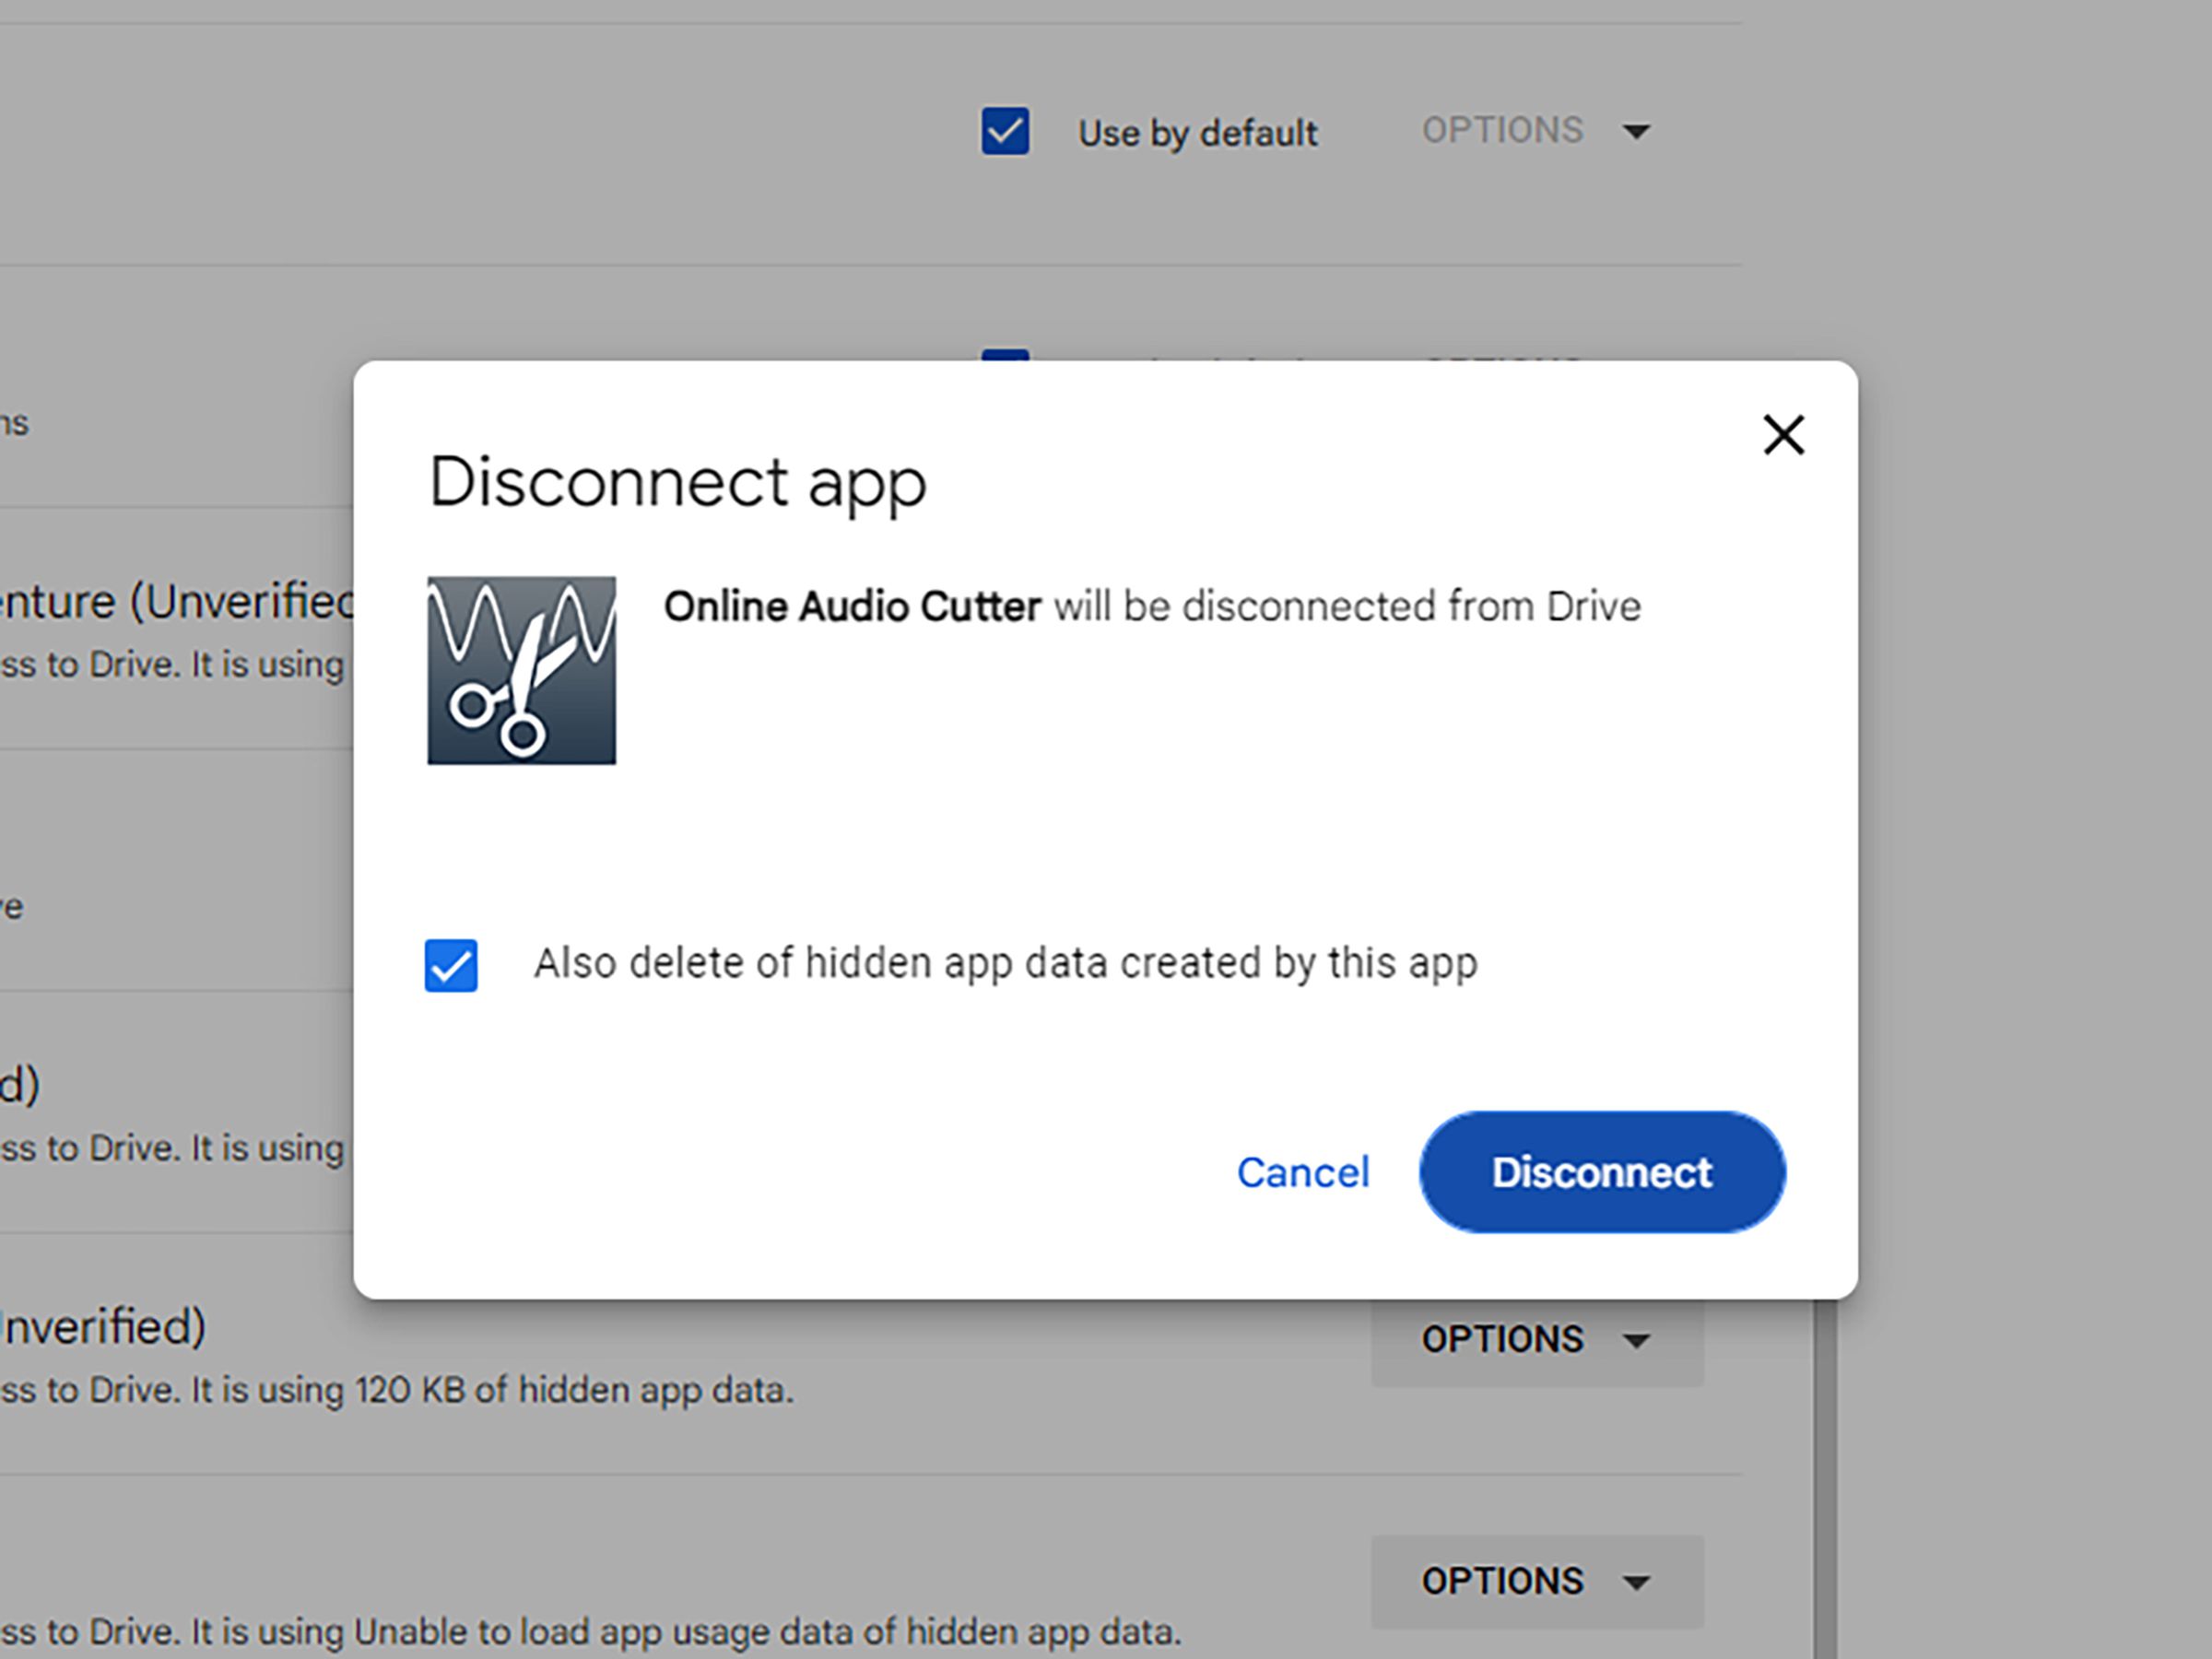 A pop-up box labeled Disconnect app and just below “Online Audio Cutter will be disconnected from Drive.”